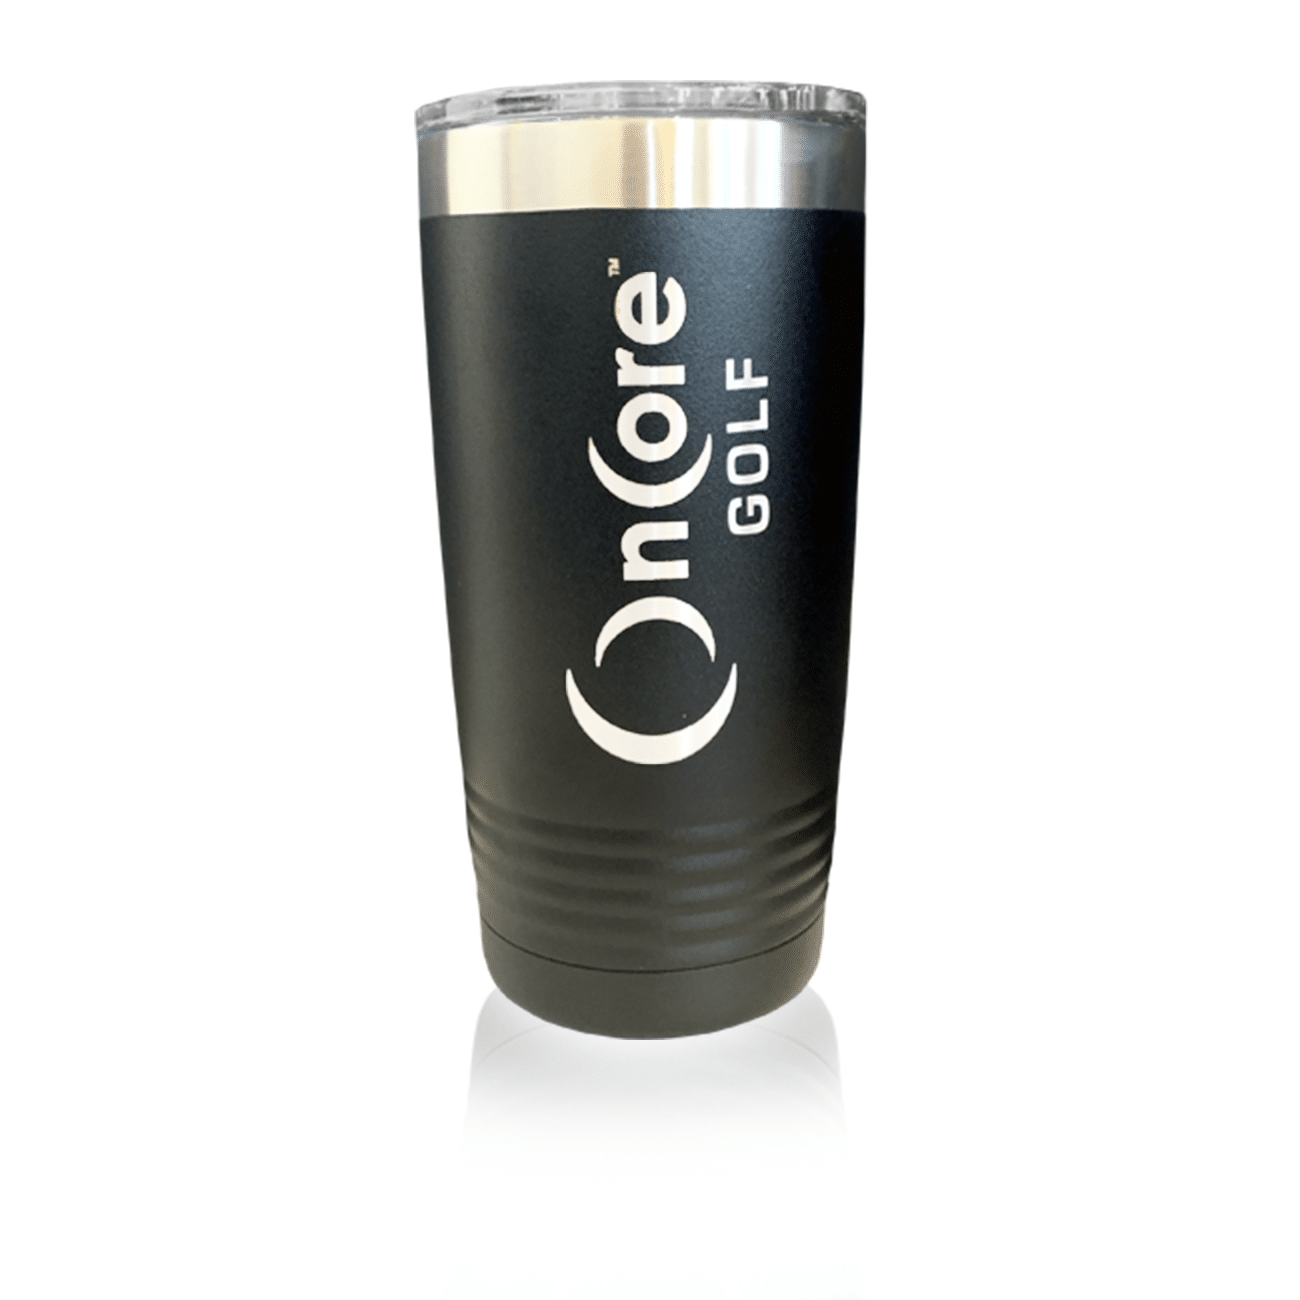 https://www.oncoregolf.com/wp-content/uploads/2019/11/products-black-hydrate-oncore.png